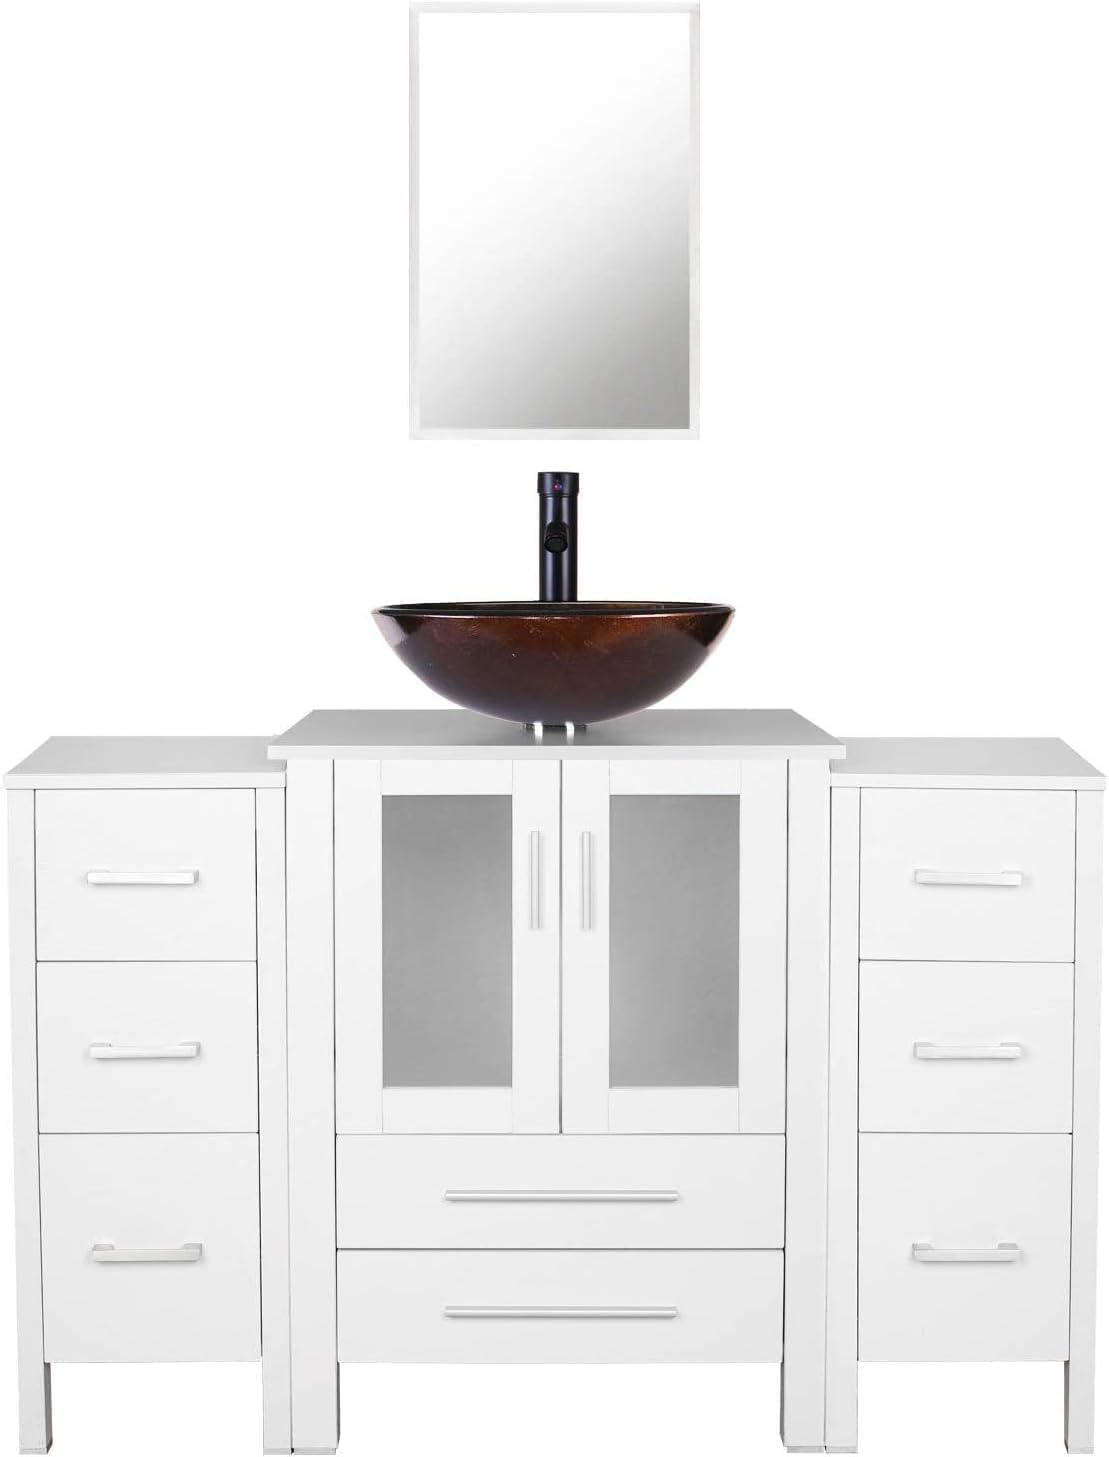 UEV 48 White Bathroom Vanity with Sink Combo,2 Bathroom Storage Side Cabinets,Modern Bathroom Vanity with Tempered Glass Vessel Sink Combo,Mirror,ORB Faucet and Drain Parts Included(A09)